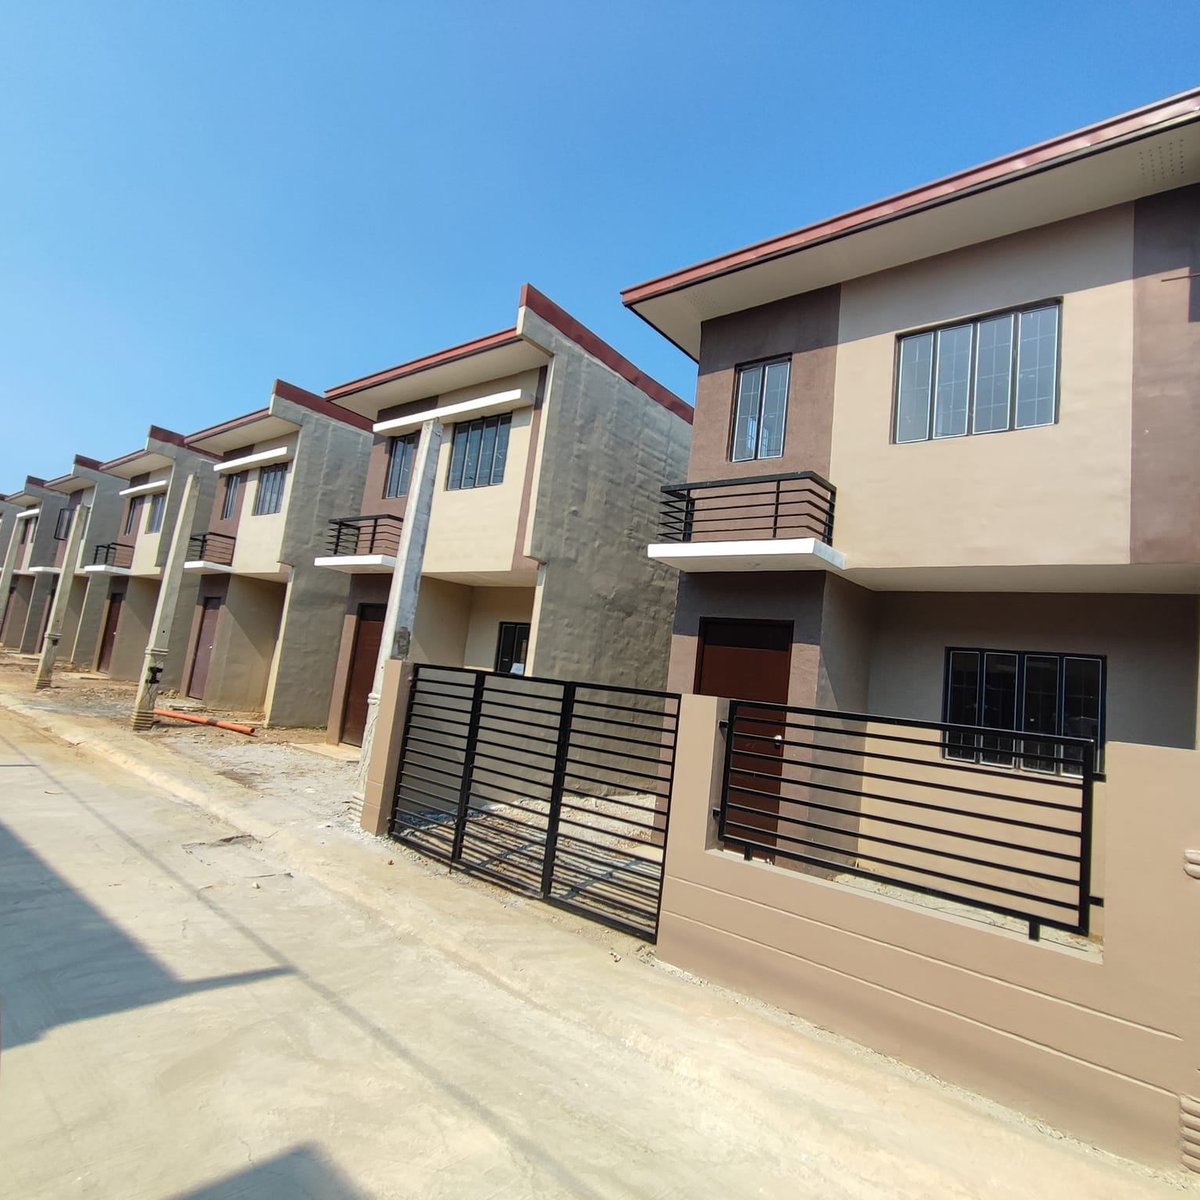 3-bedroom Single Attached House For Sale in Balanga Bataan